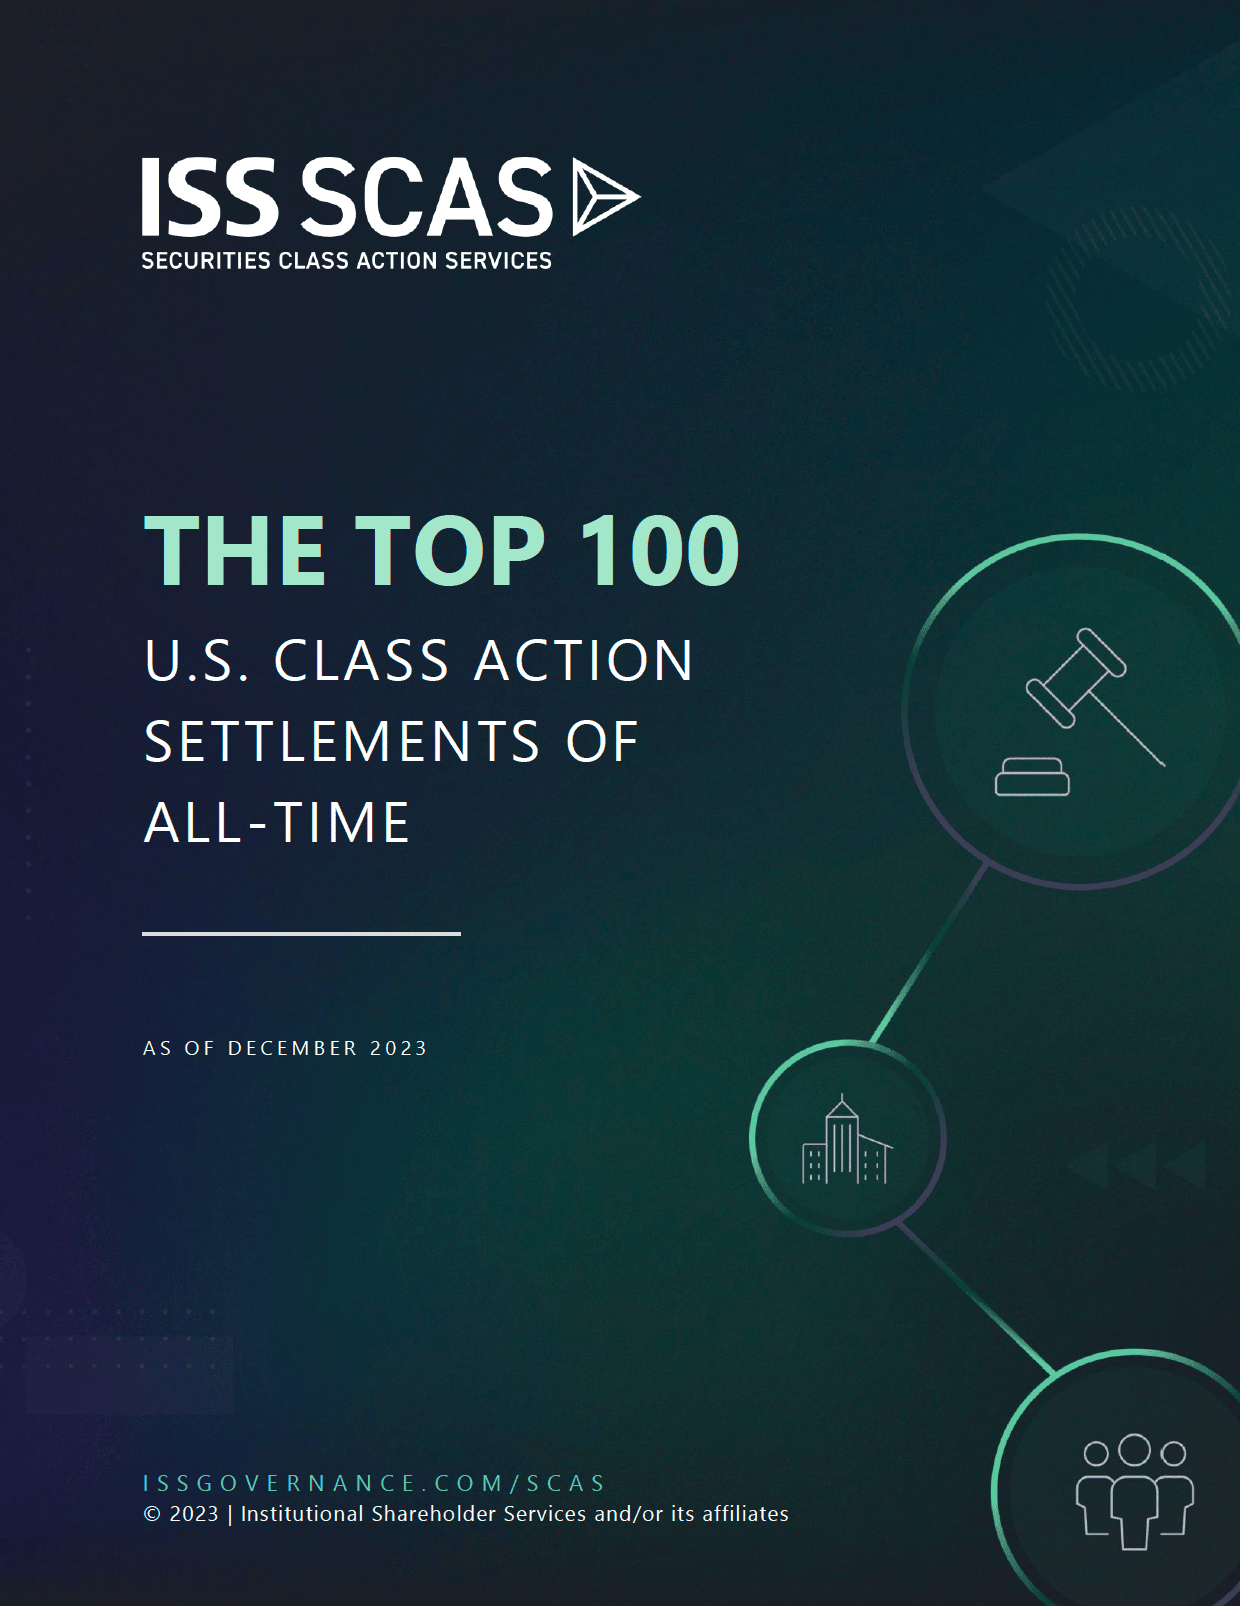 The Top 100 U.S. Class Action Settlements of All Time as of December 2023